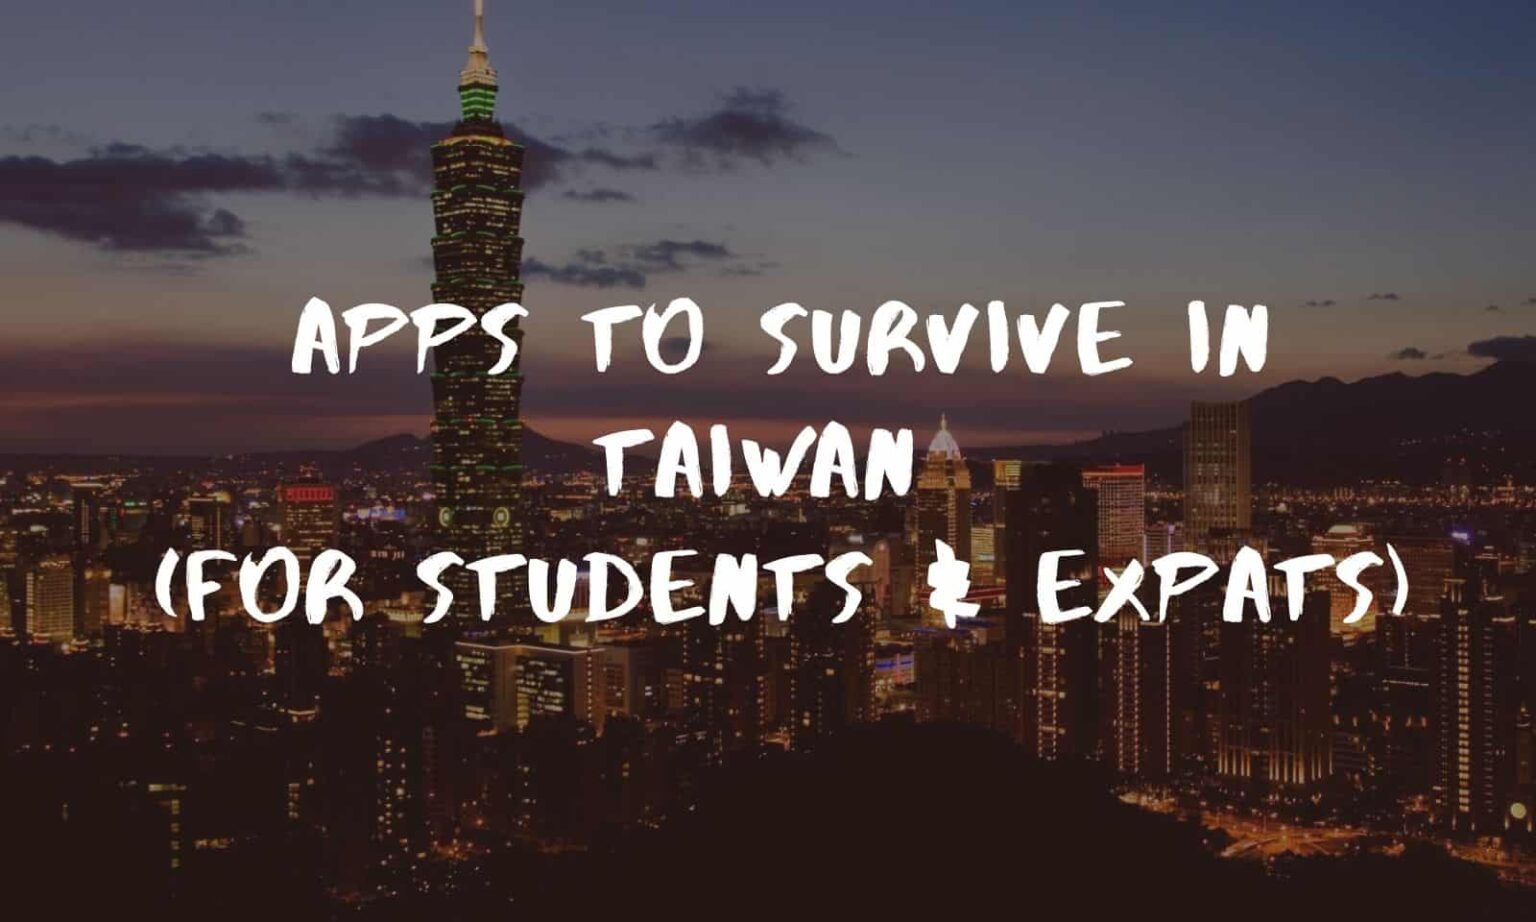 Apps to survive Taiwan Cover Image